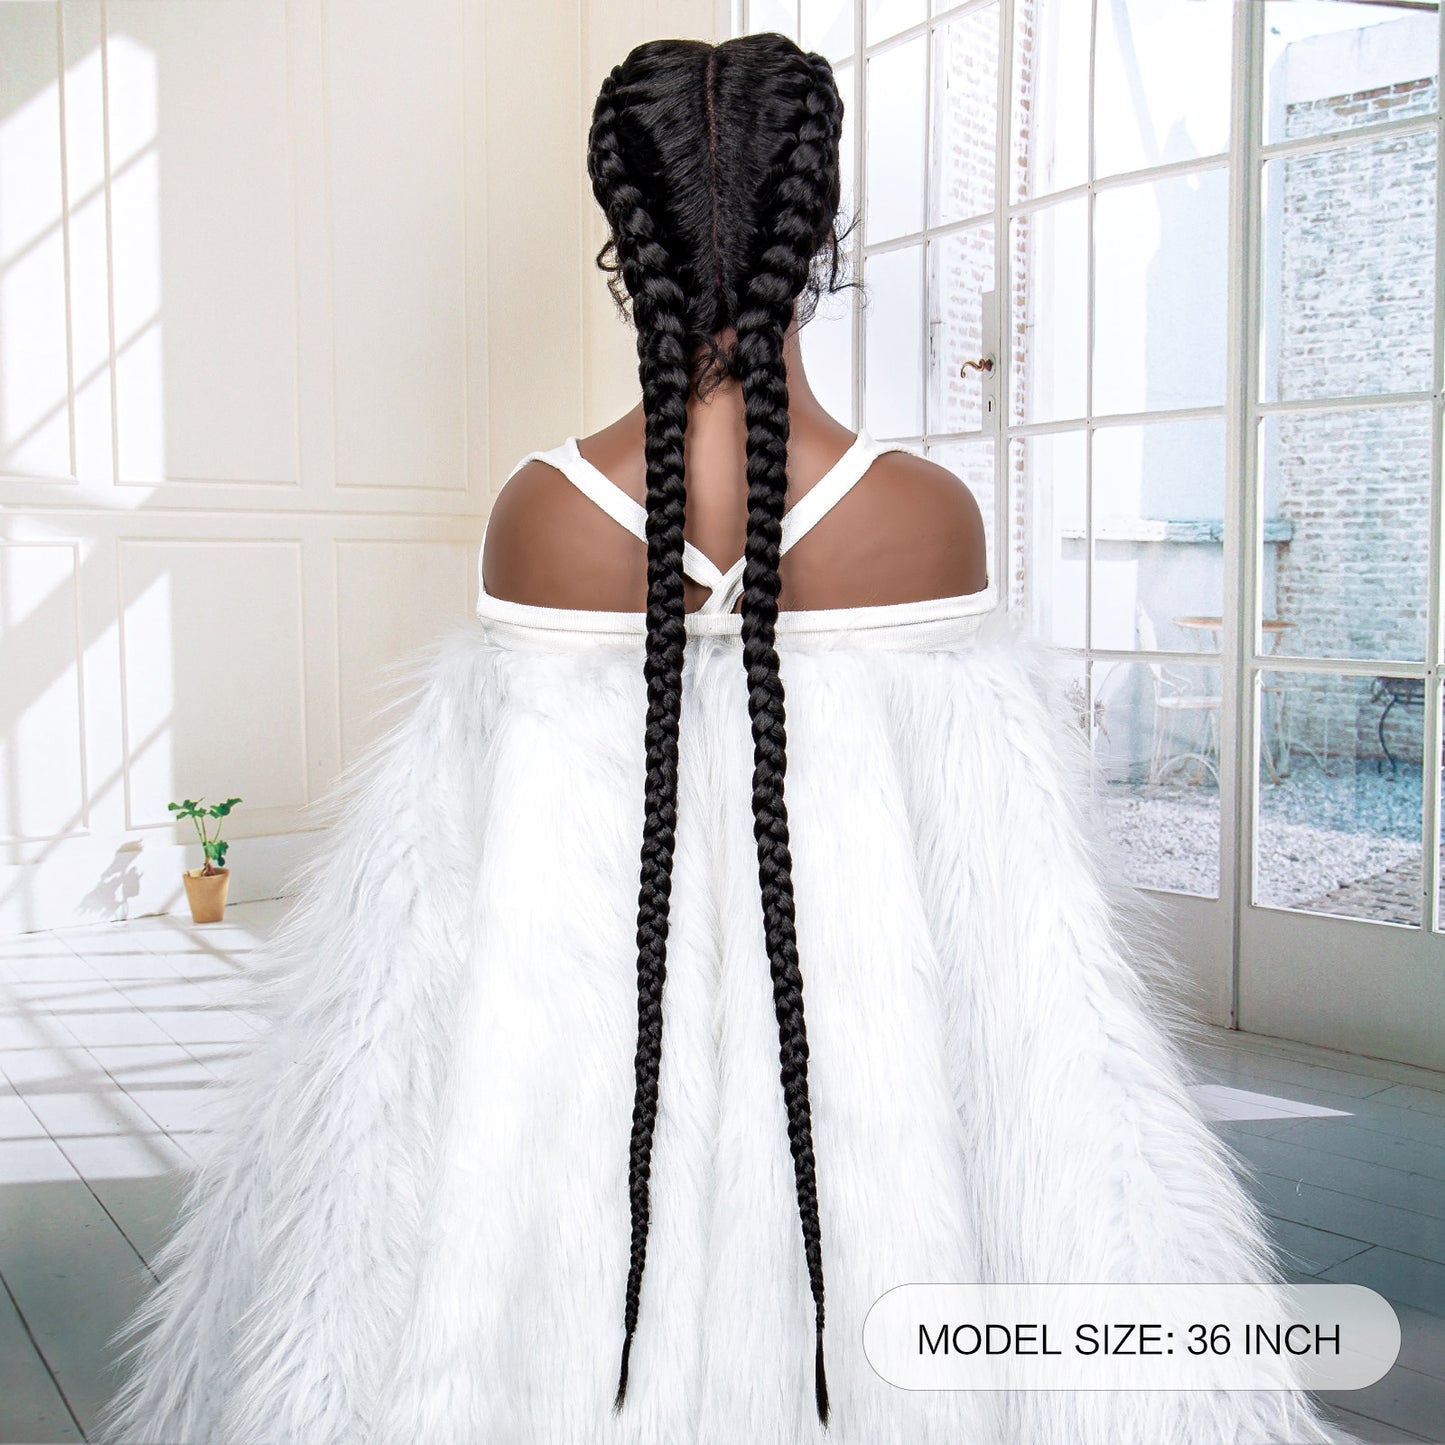 36 Inches Long Lace Front Synthetic Braided Wigs Lace Front Twins Cornrow Braided Wig for Black Women with Baby Hair Middle Part